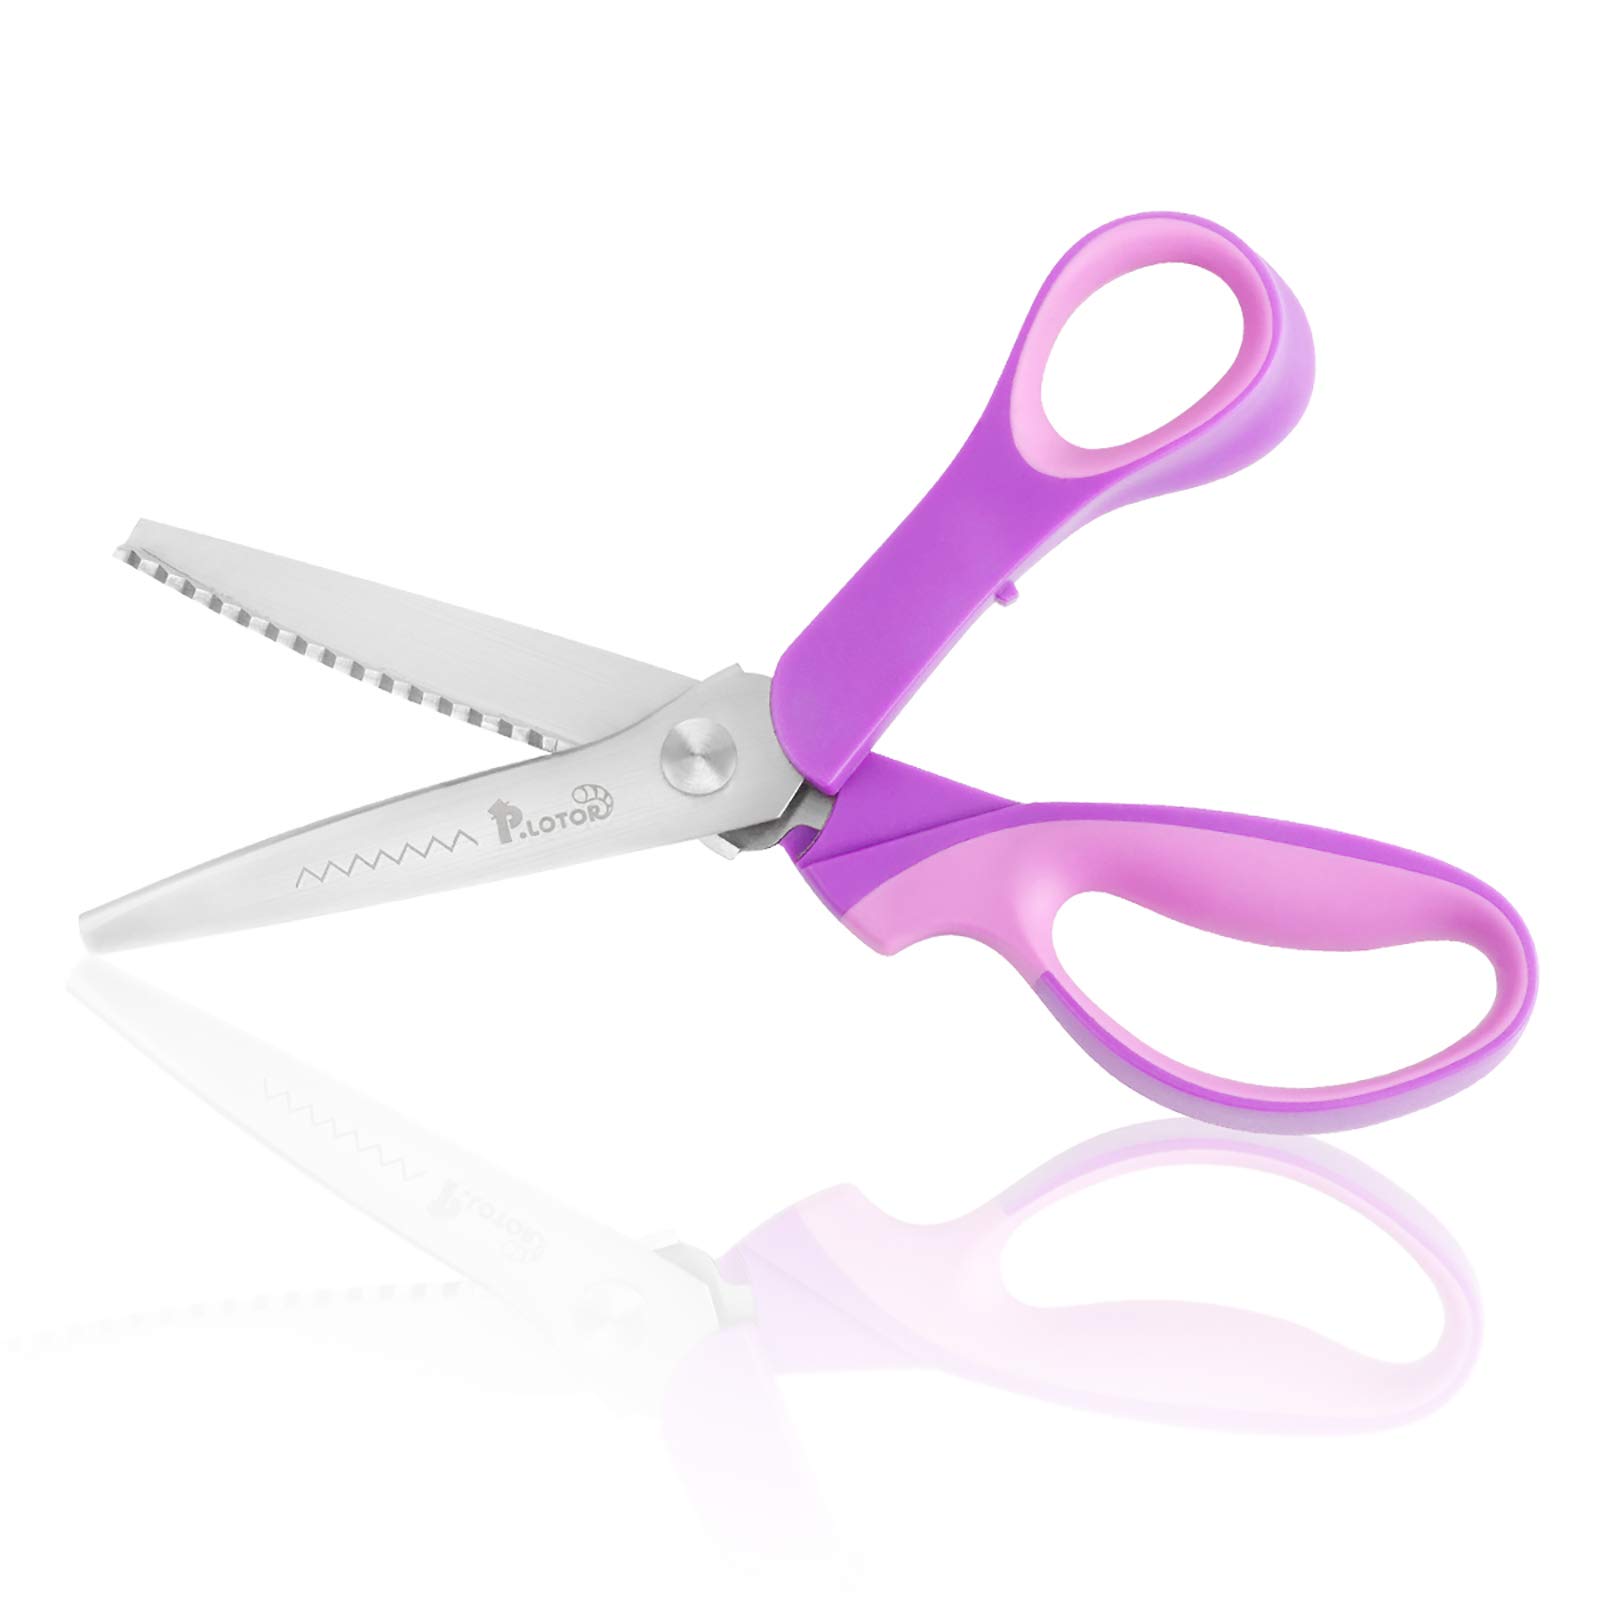 Sewing Scissors Cutting Paper Small Delicate Pointed Crafts Plum